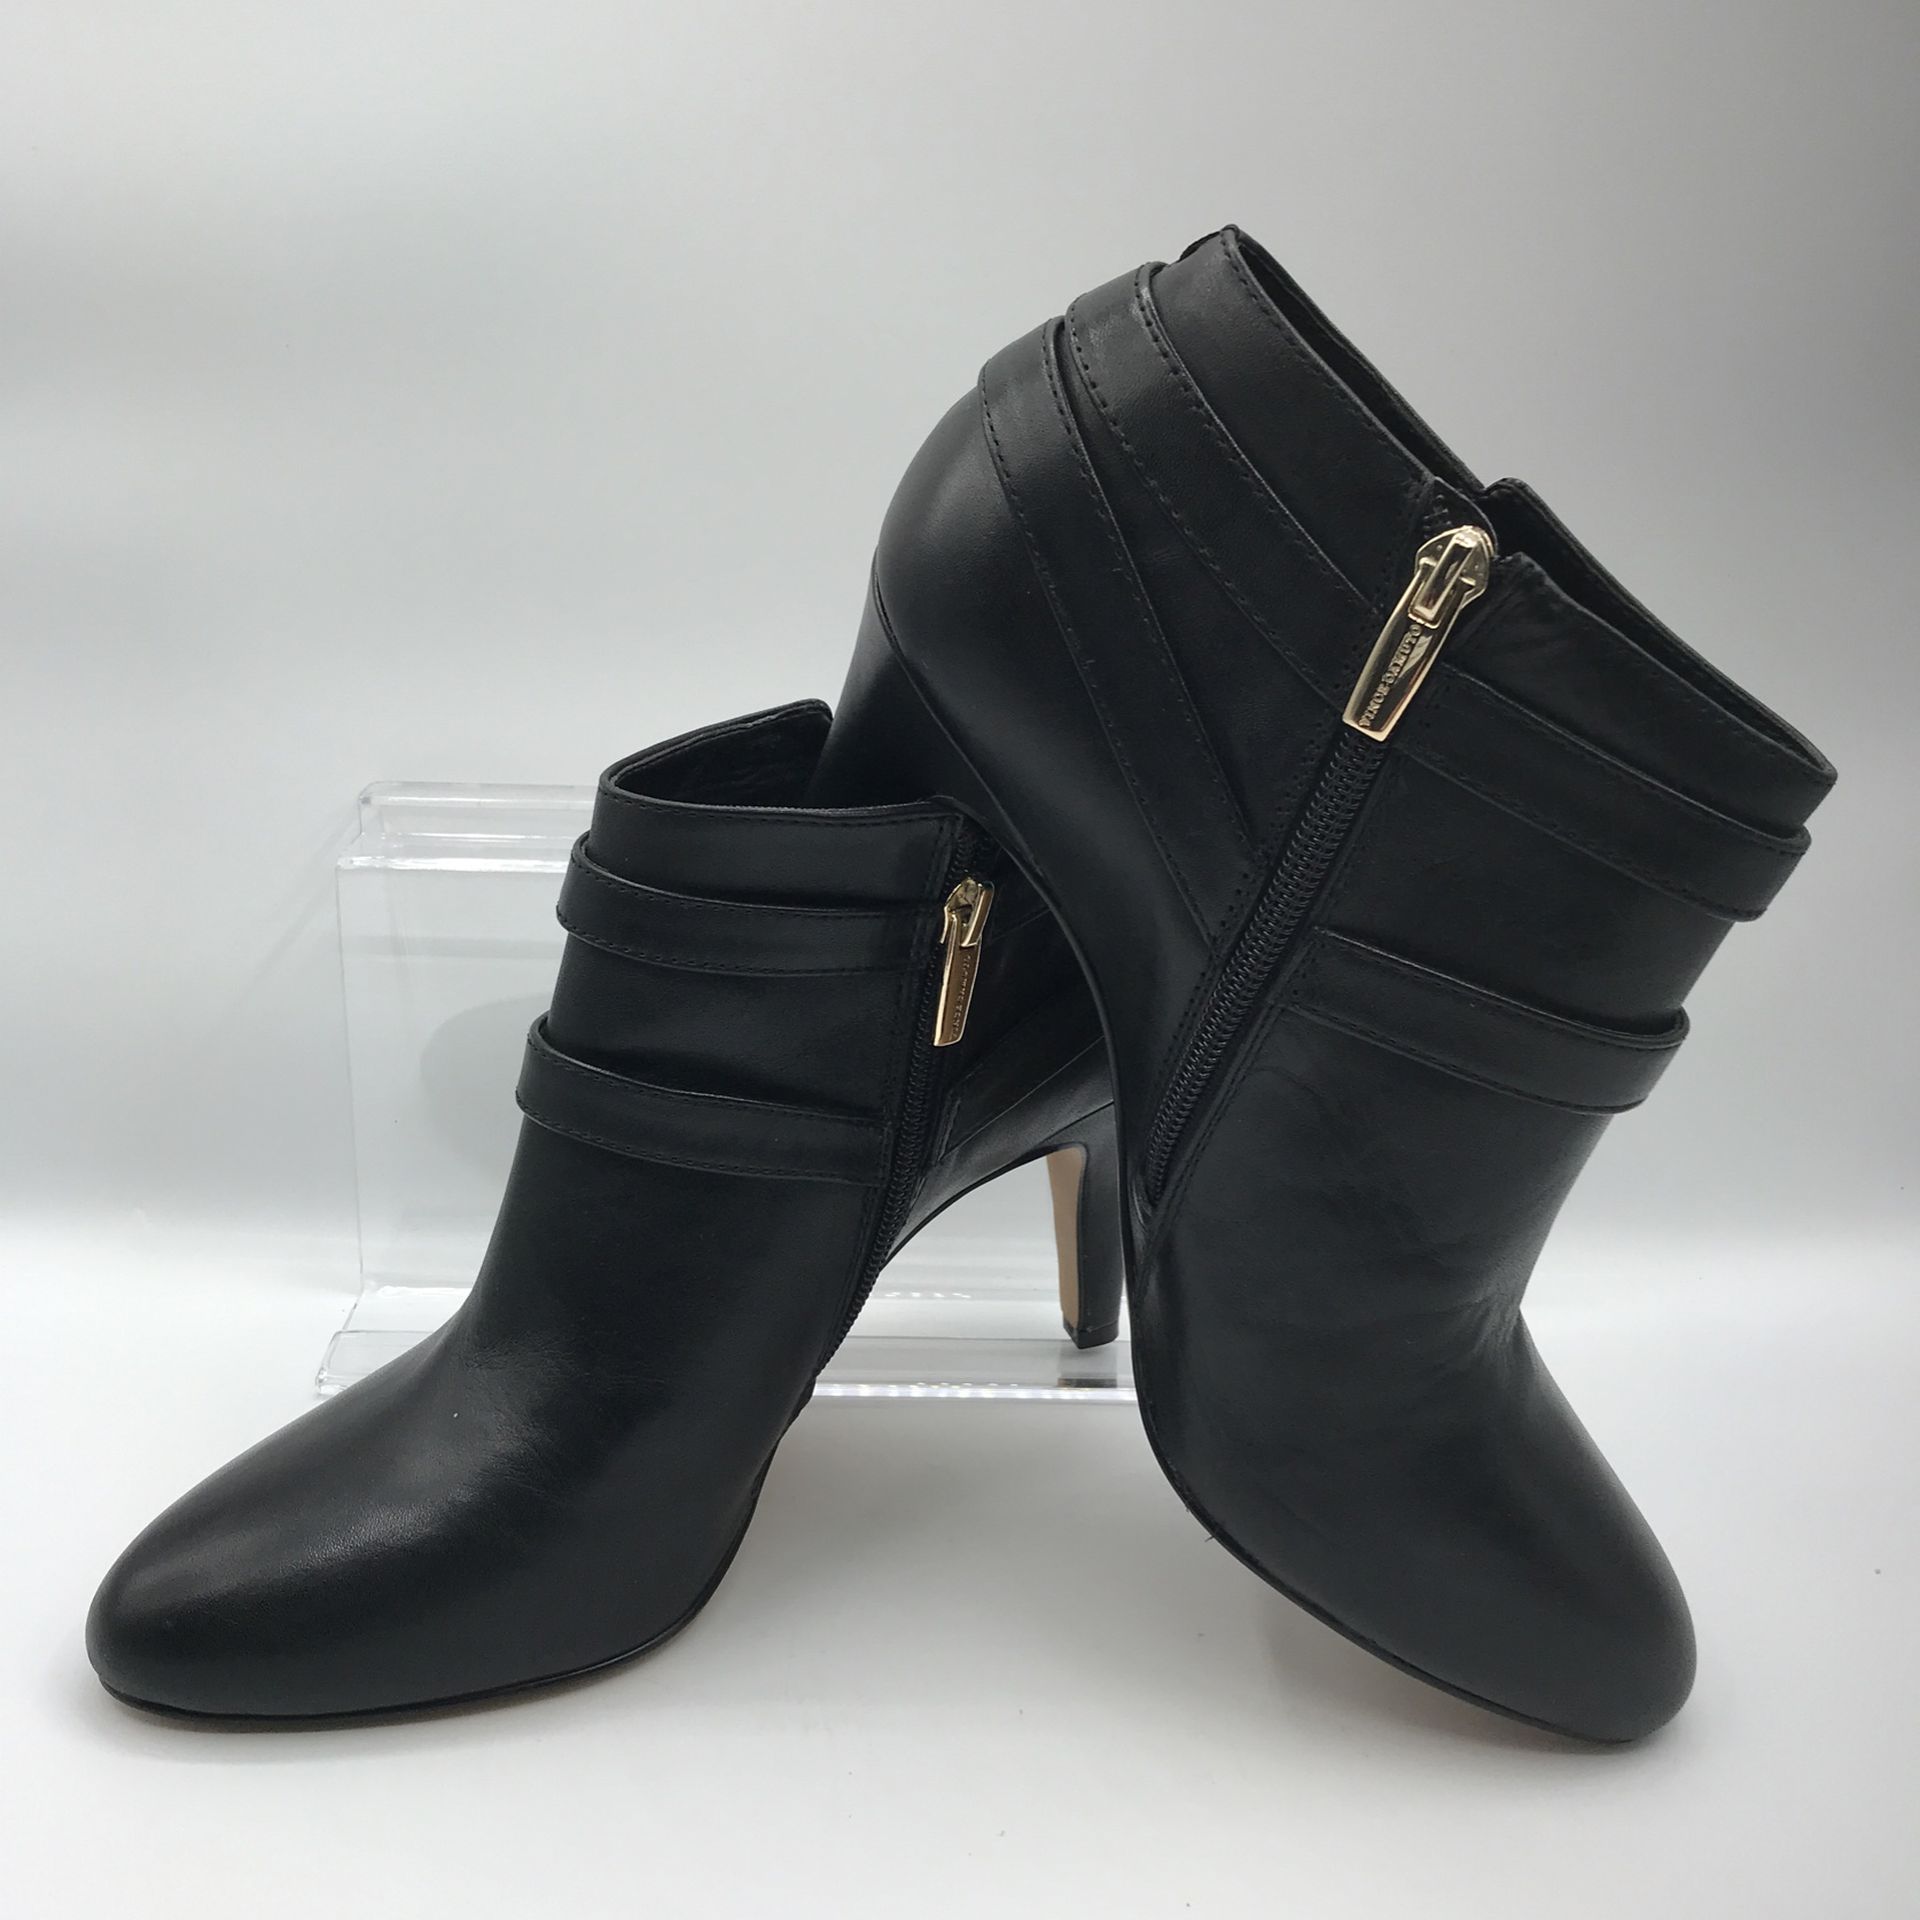 Authentic Vince Camuto Women’s Leather Upper Shoes Vadirya Heeled Bootie Black Size 8M